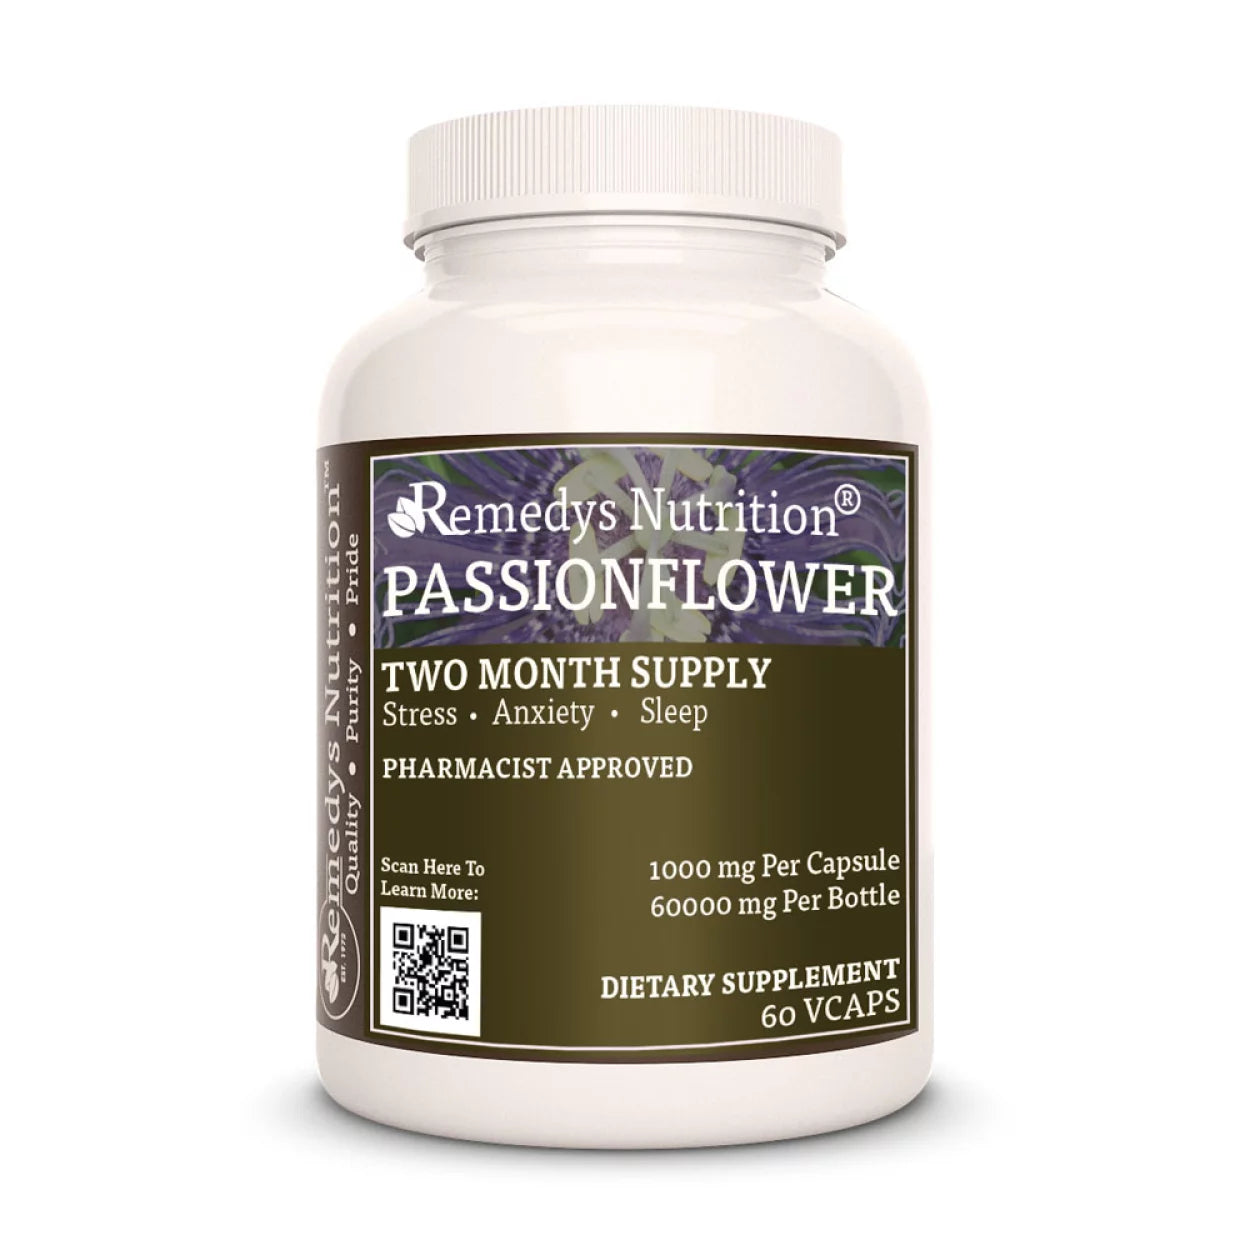 Image of Remedy's Nutrition® Passionflower Capsules Herbal Dietary Supplement front bottle. Made in the USA.